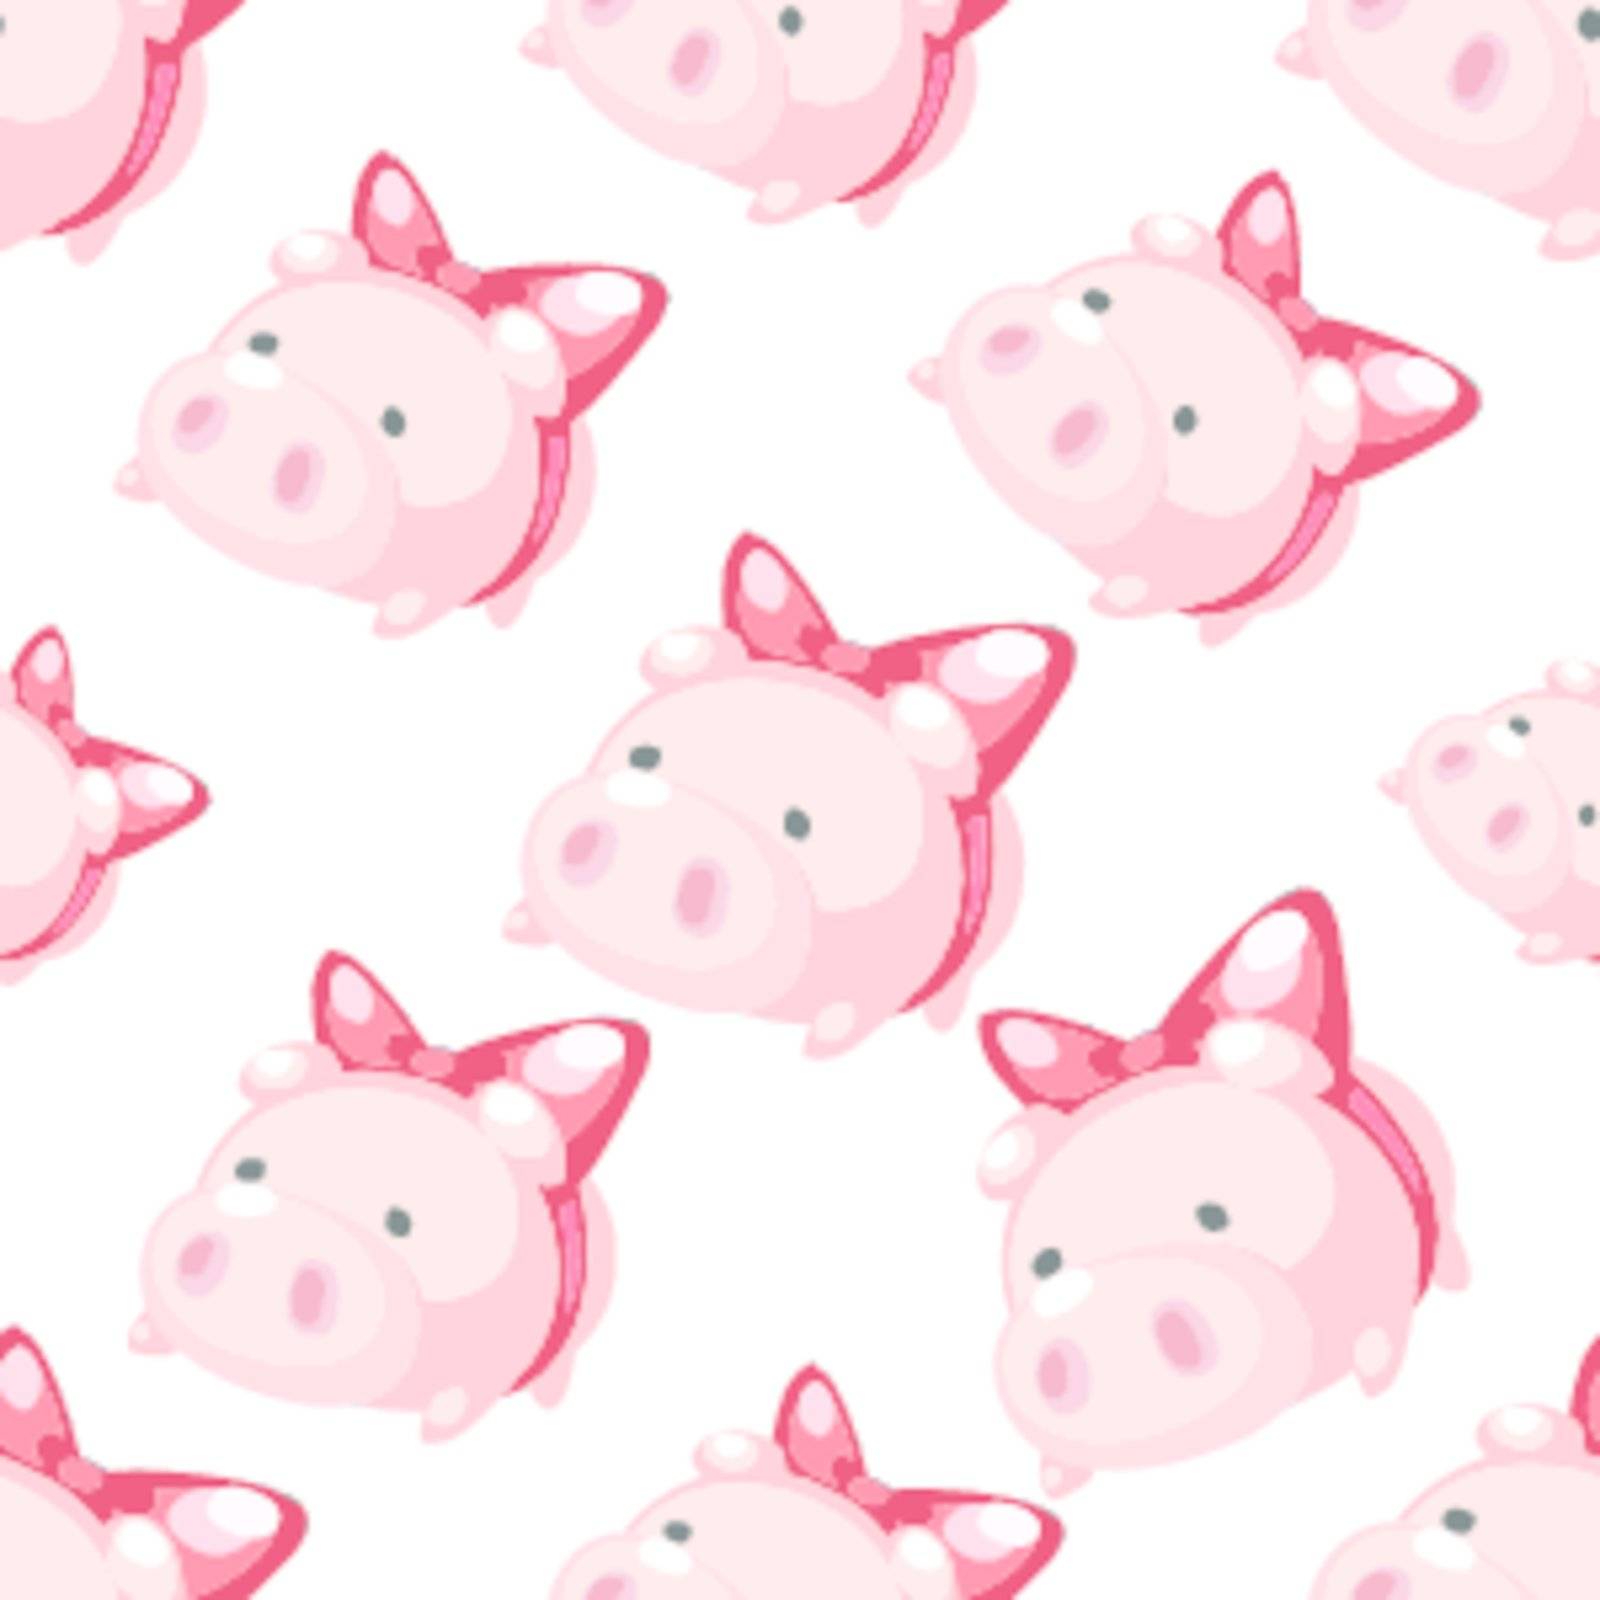 Adorable pigs with red ribbon on white background. by mvp_hero@hotmail.com